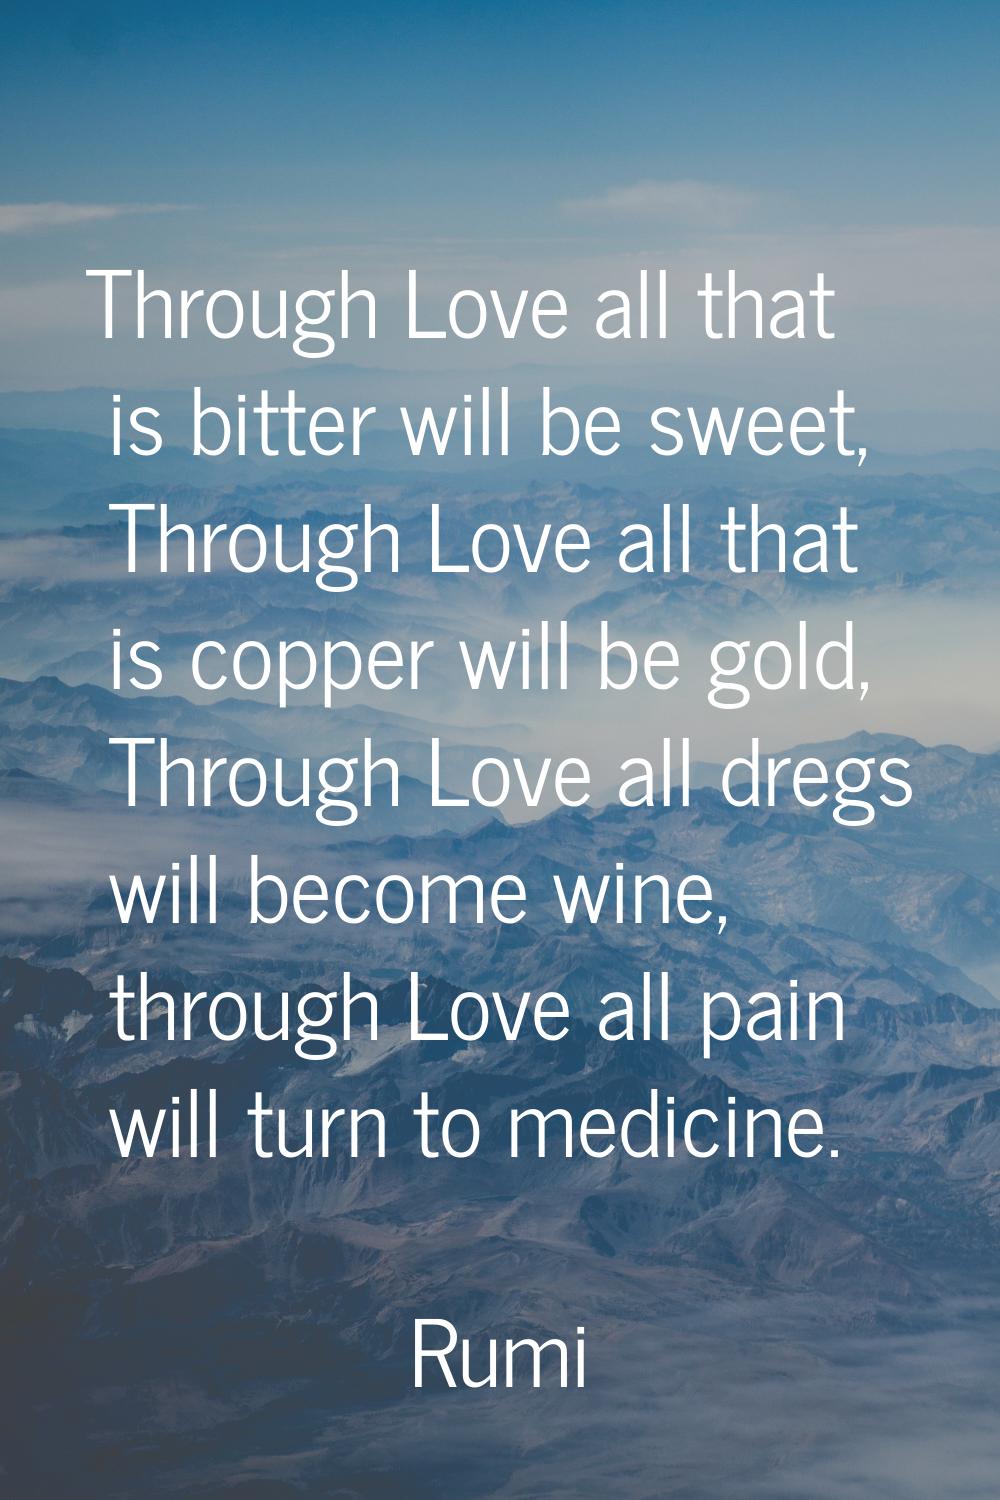 Through Love all that is bitter will be sweet, Through Love all that is copper will be gold, Throug